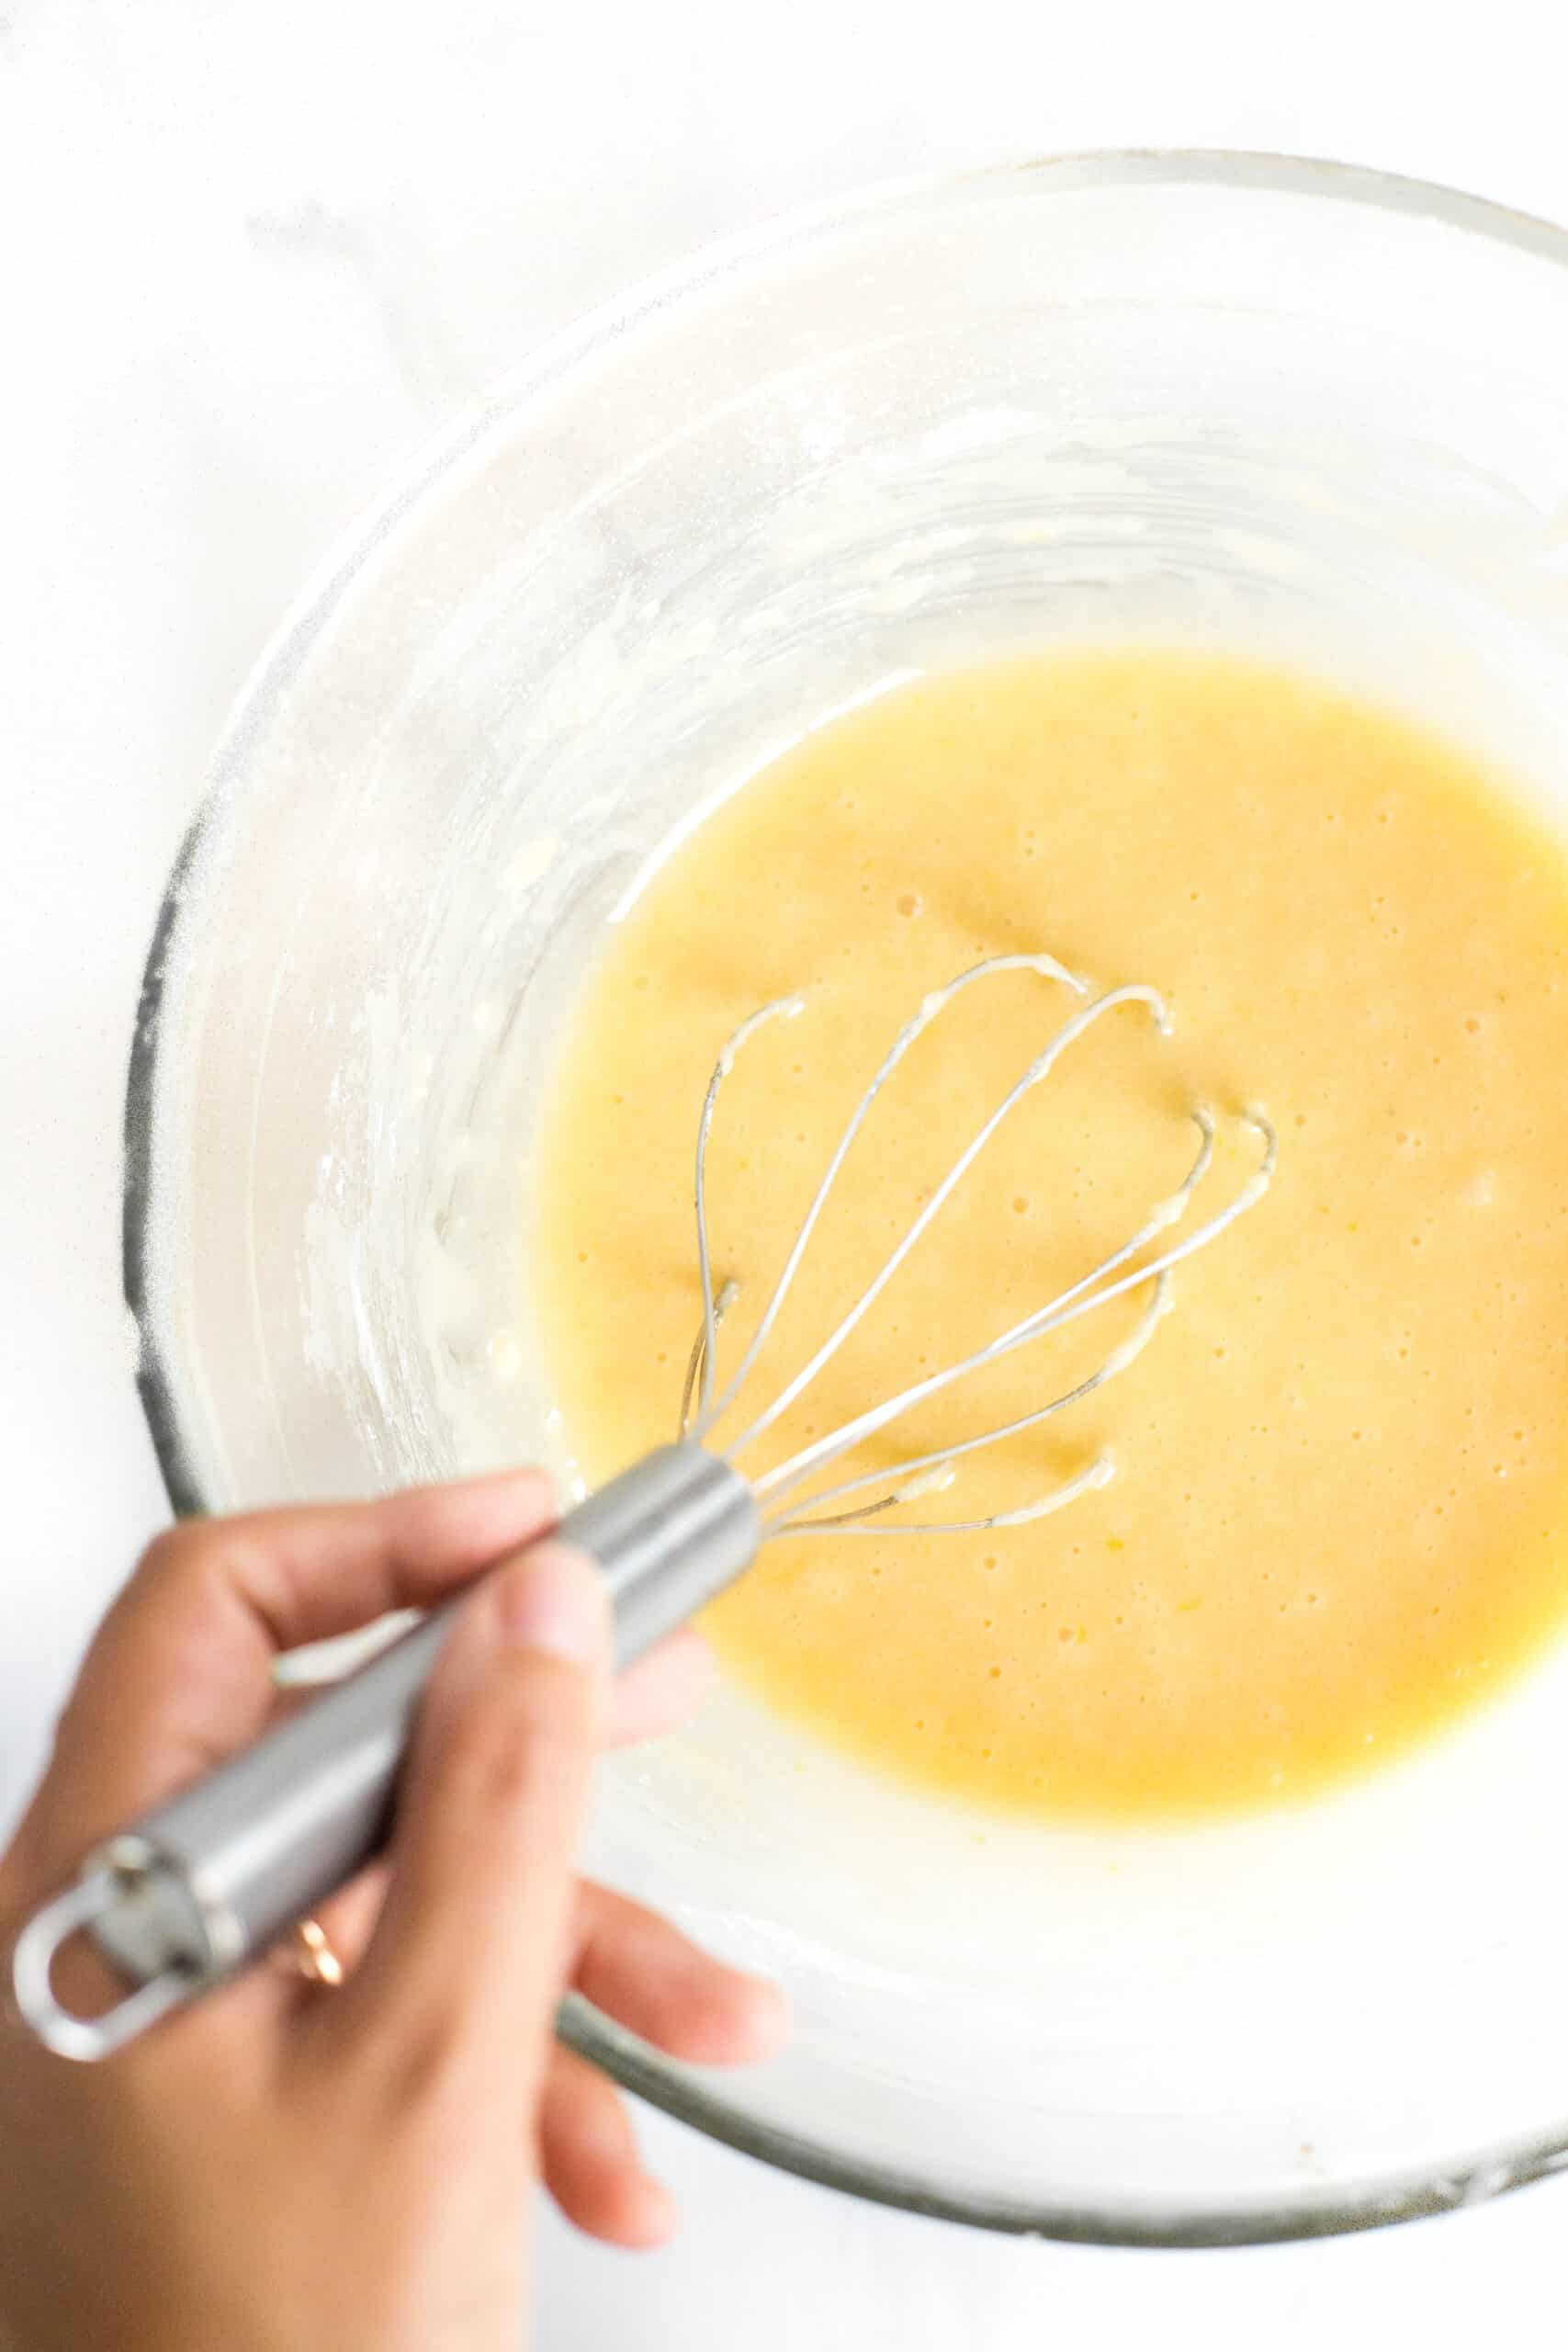 Whisking madeleine batter in a glass mixing bowl.